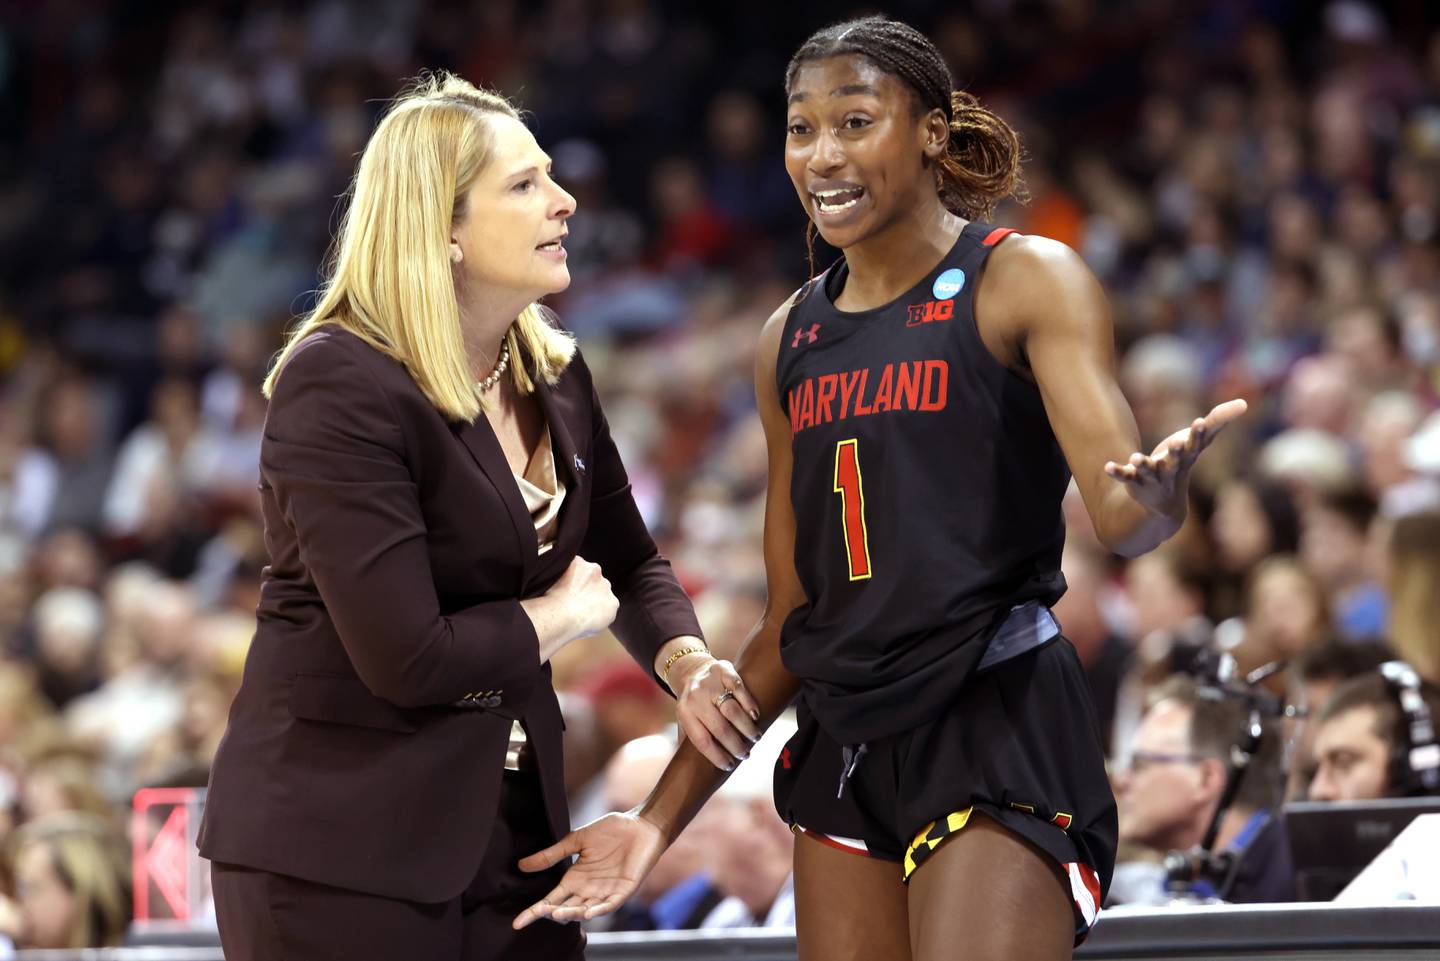 SPOKANE, WASHINGTON - MARCH 25: Head coach Brenda Frese of the Maryland Terrapins and Diamond Miller #1 react against the Stanford Cardinal during the second half during the Sweet Sixteen round of the NCAA Women's Basketball Tournament at Spokane Veterans Memorial Arena on March 25, 2022 in Spokane, Washington.